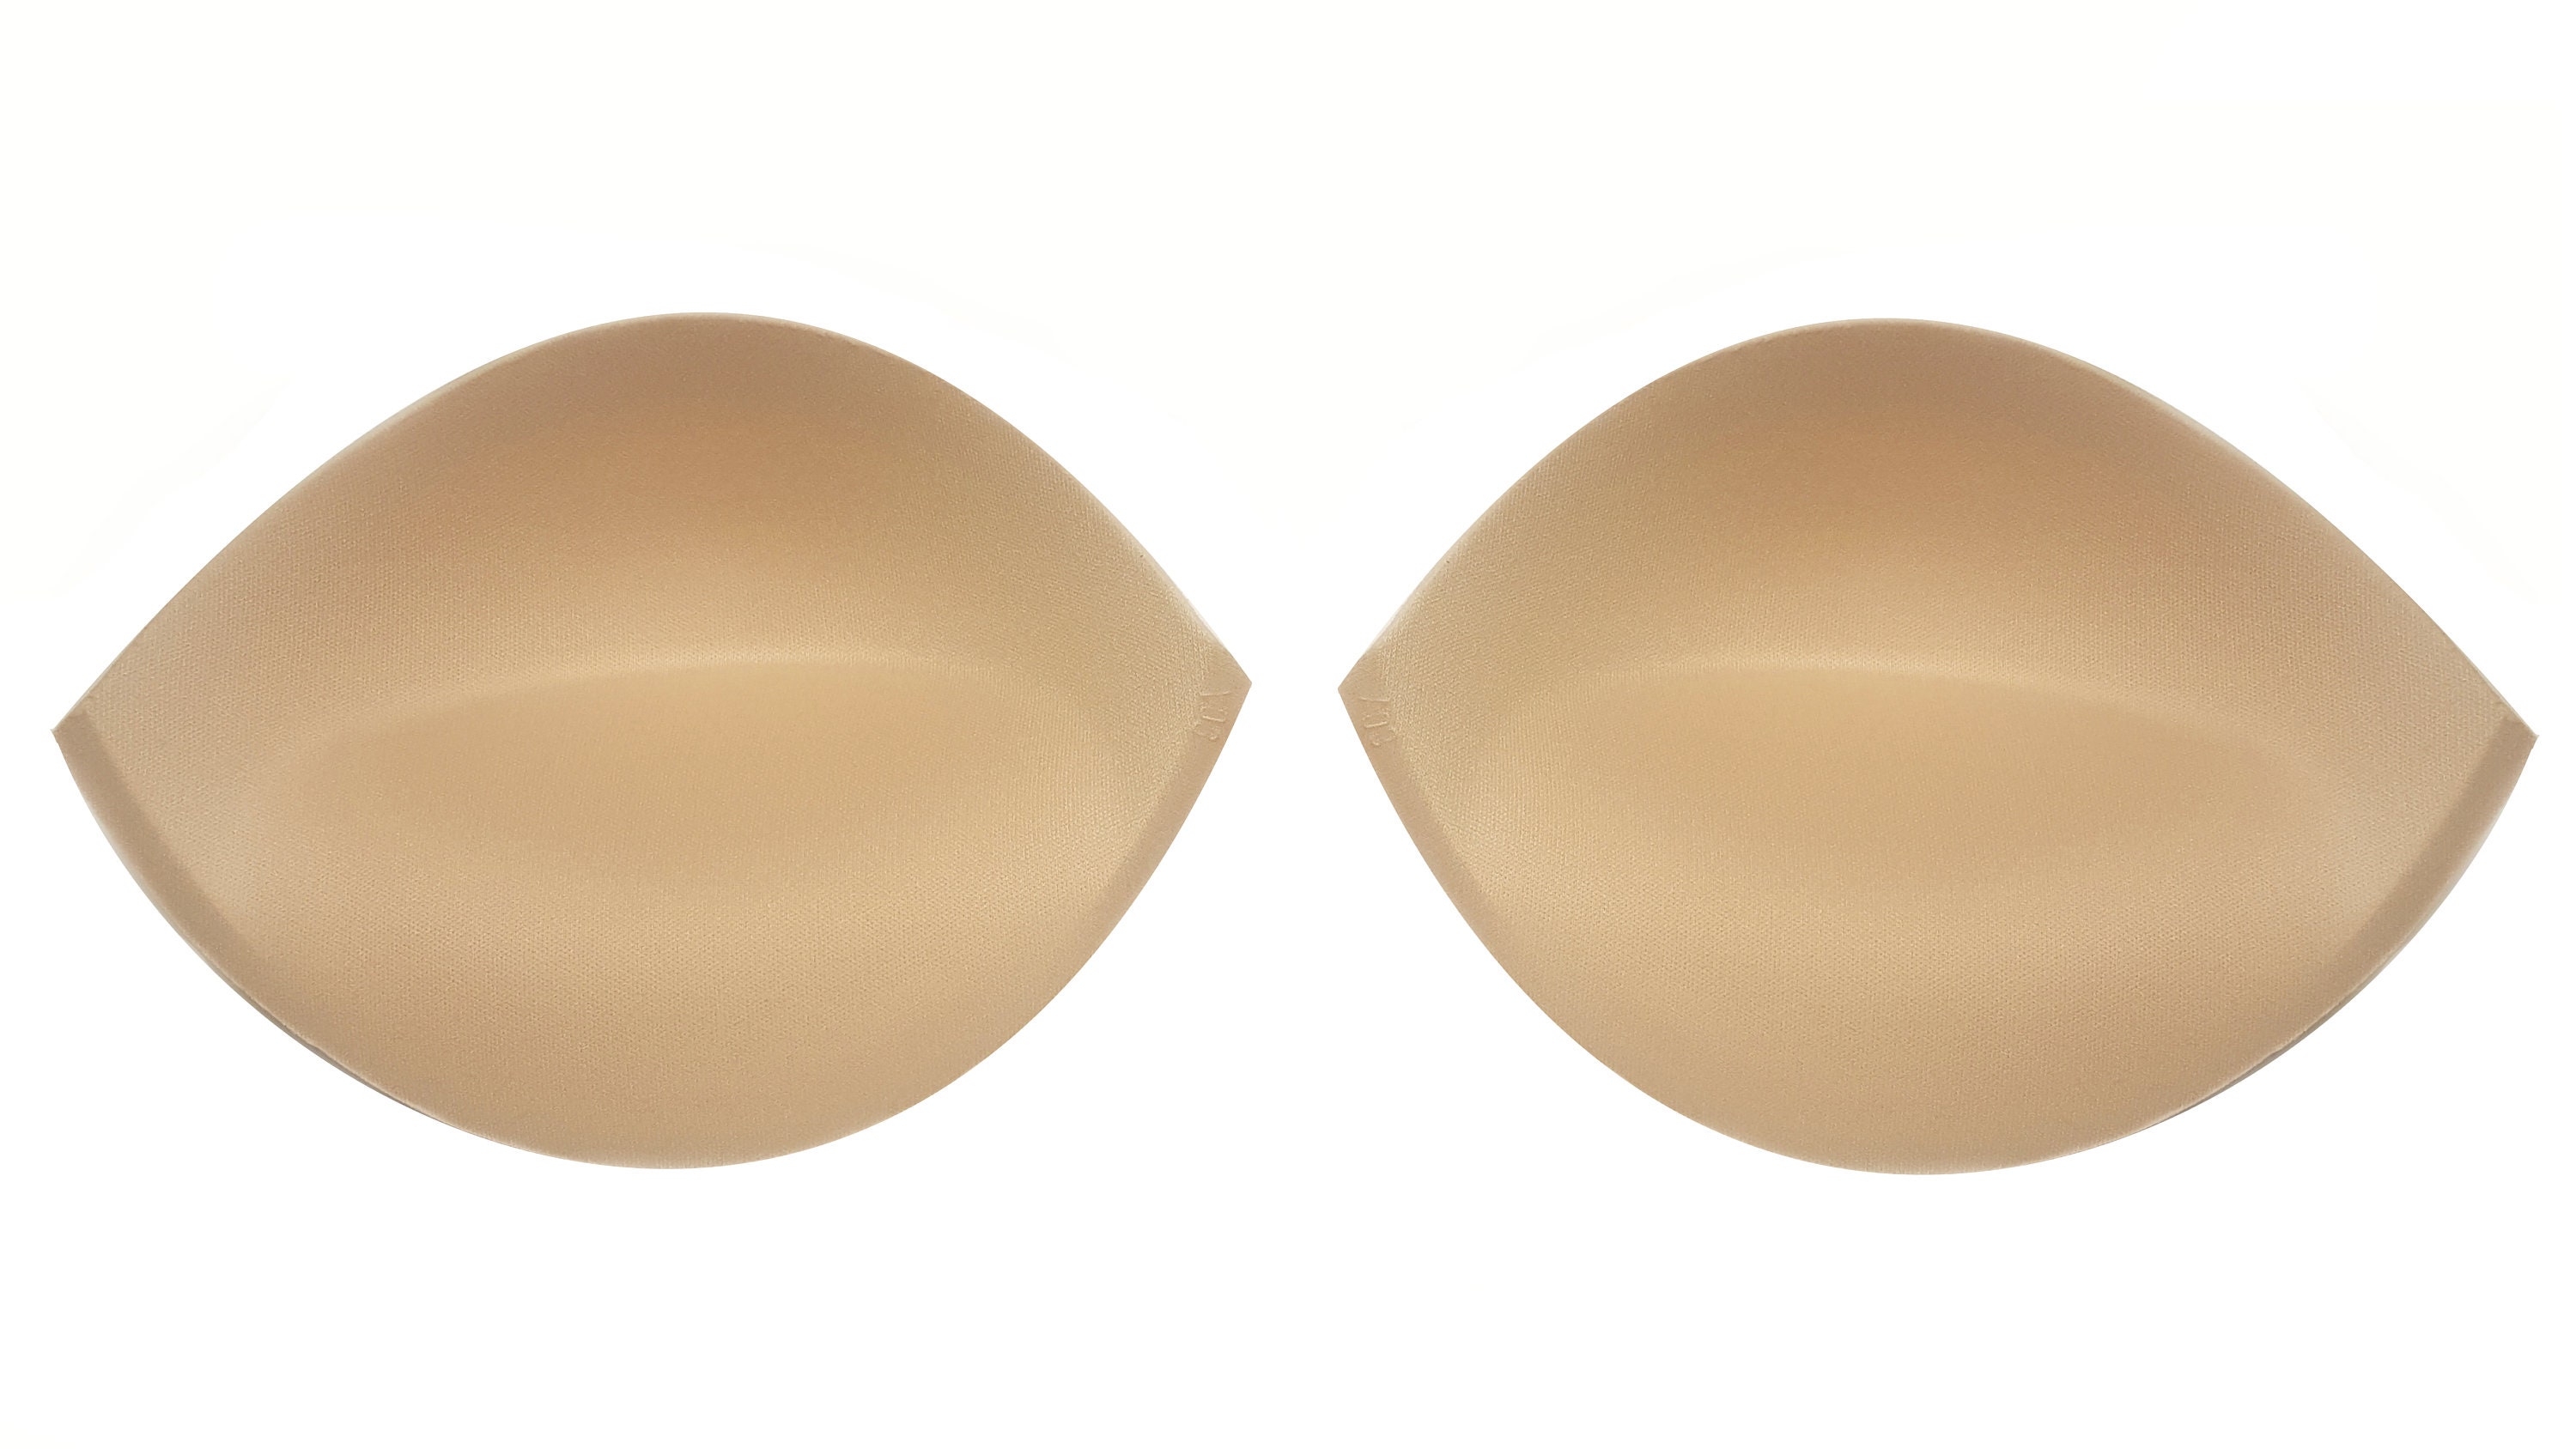 Non-Serged Push-Up Gel Bra Cups - Size A - 1 Pair/Pack - Black